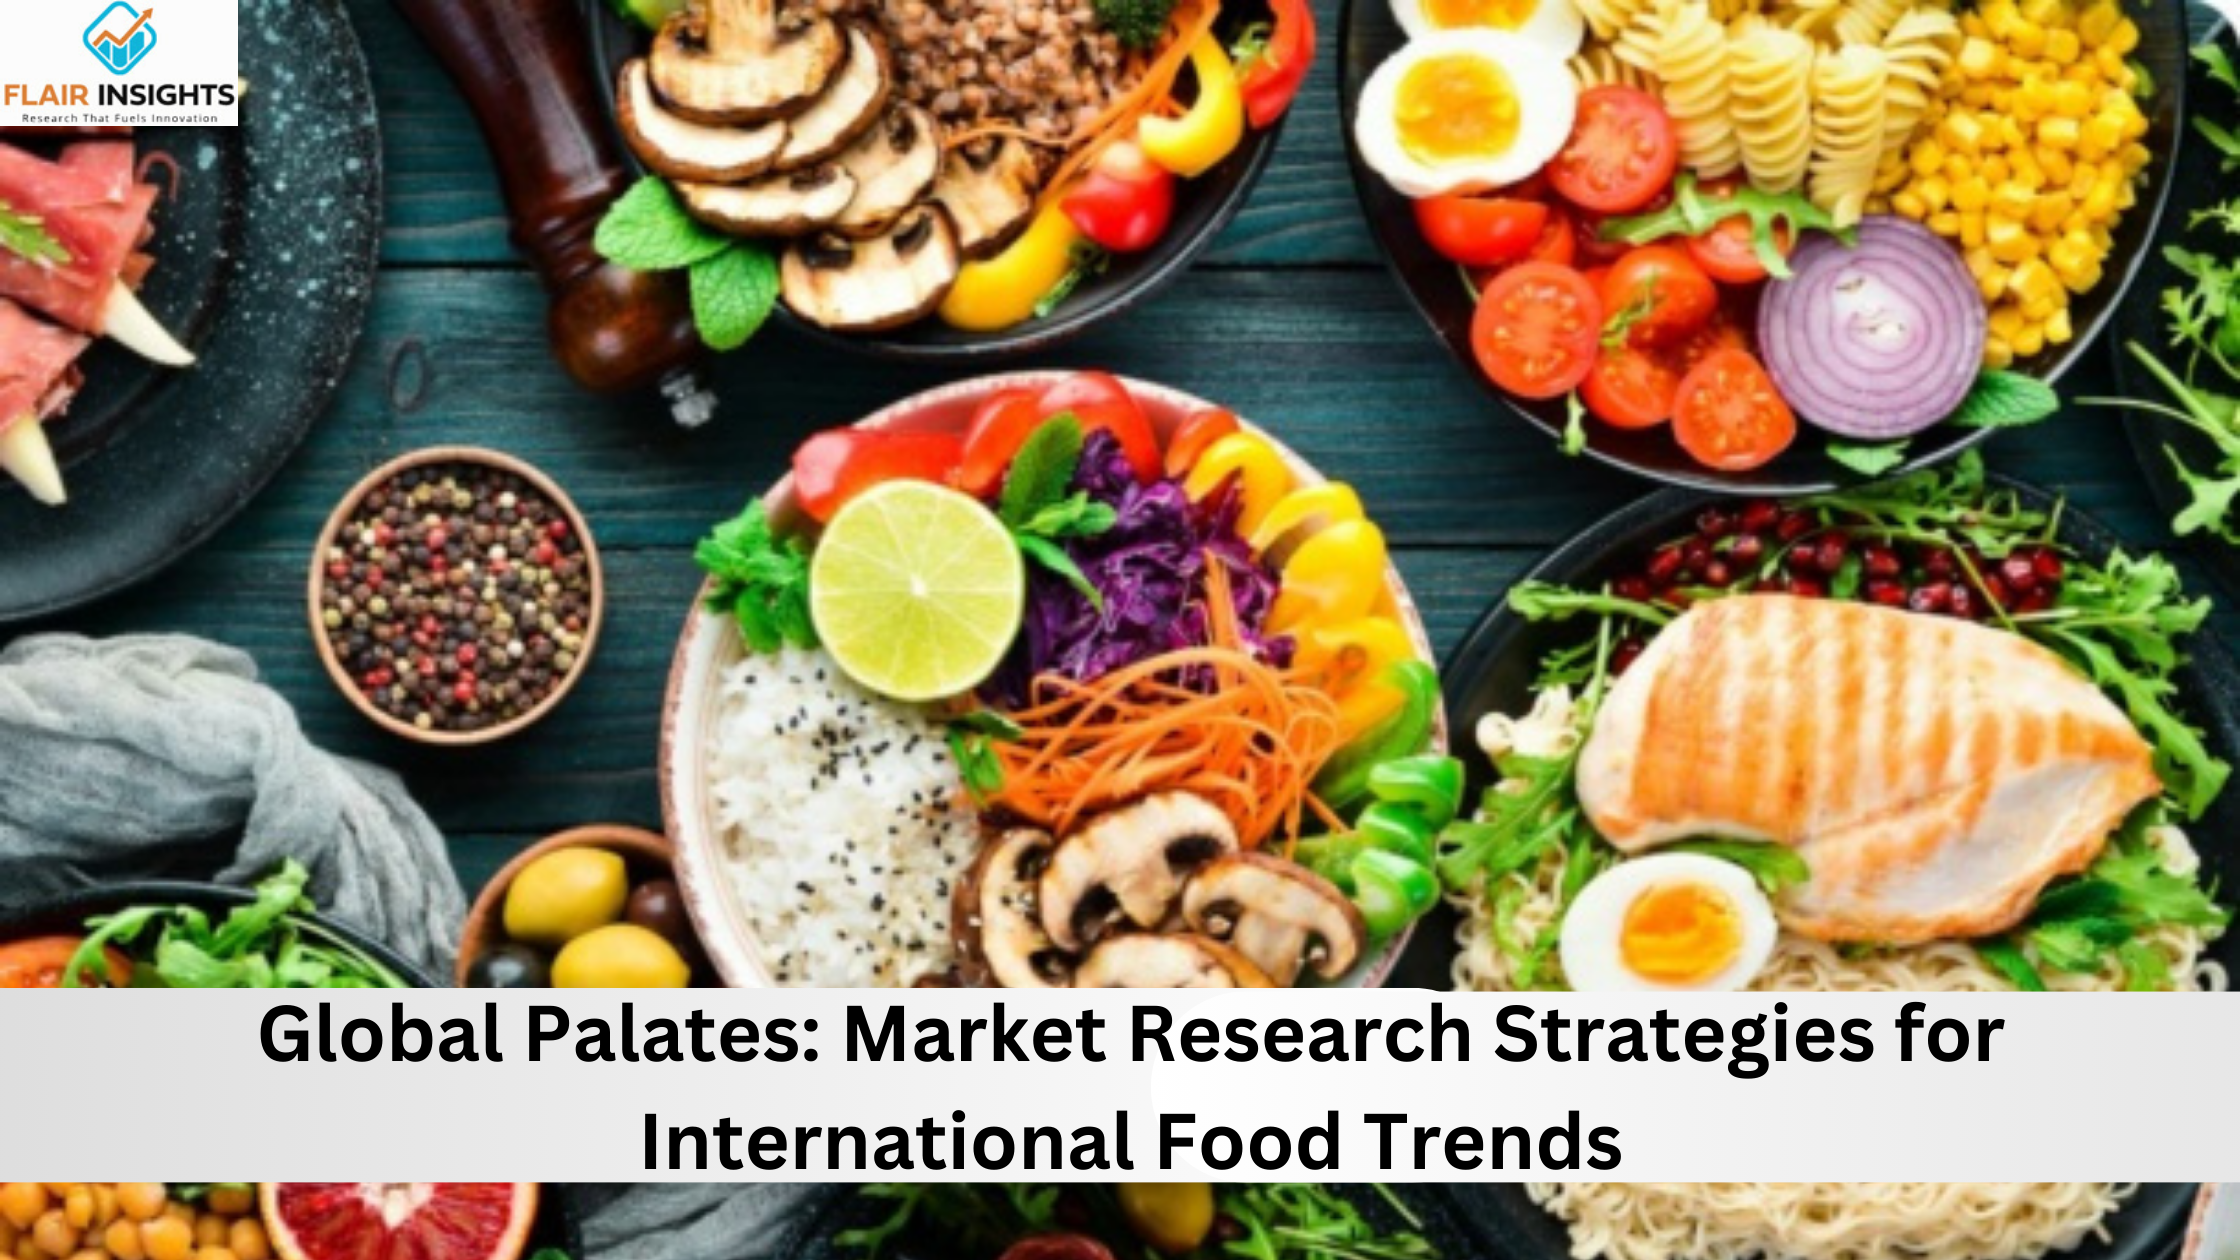 Global Palates: Market Research Strategies for International Food Trends